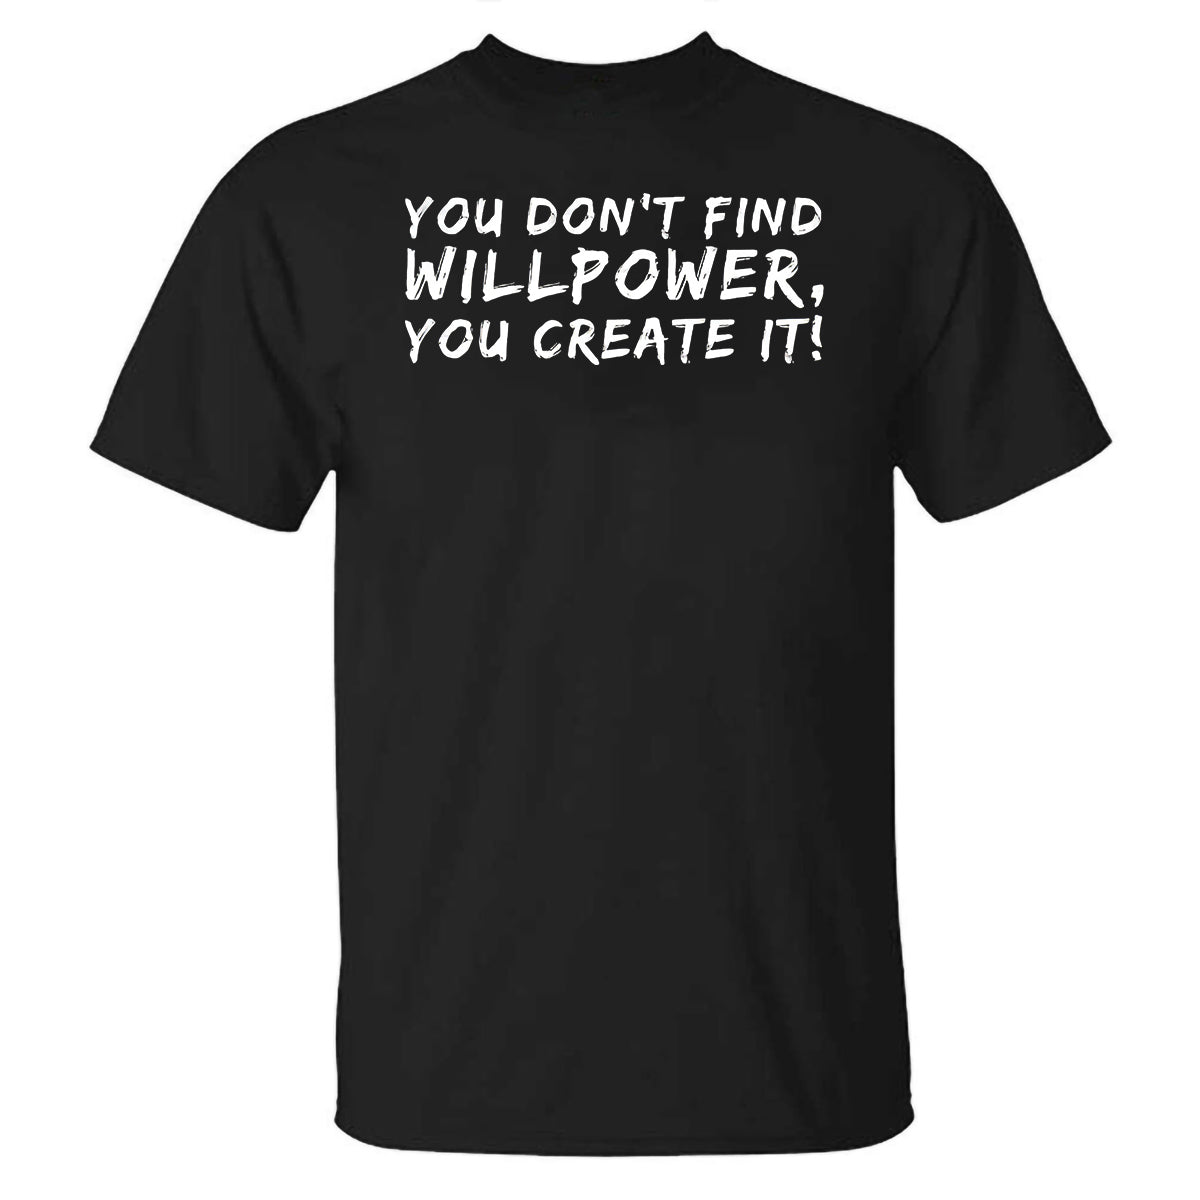 You Don't Find Willpower, You Create It! Printed Casual T-shirt